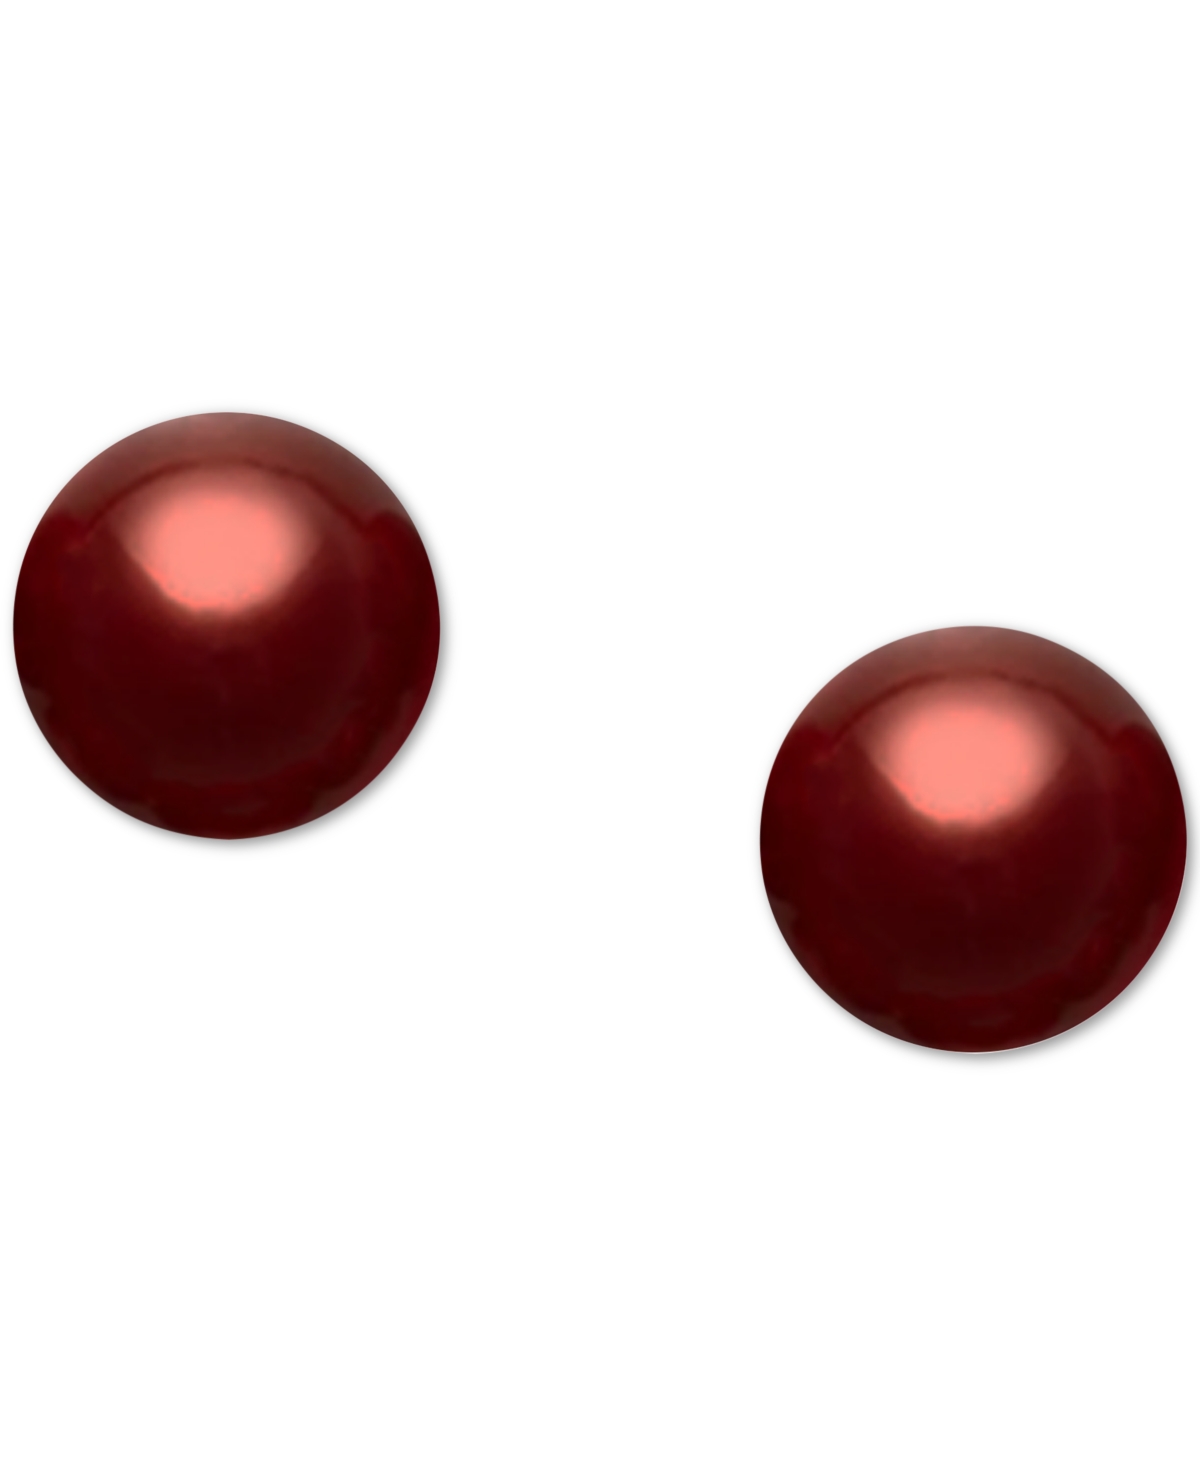 Imitation Pearl (12mm) Stud Earrings, Created for Macy's - Red